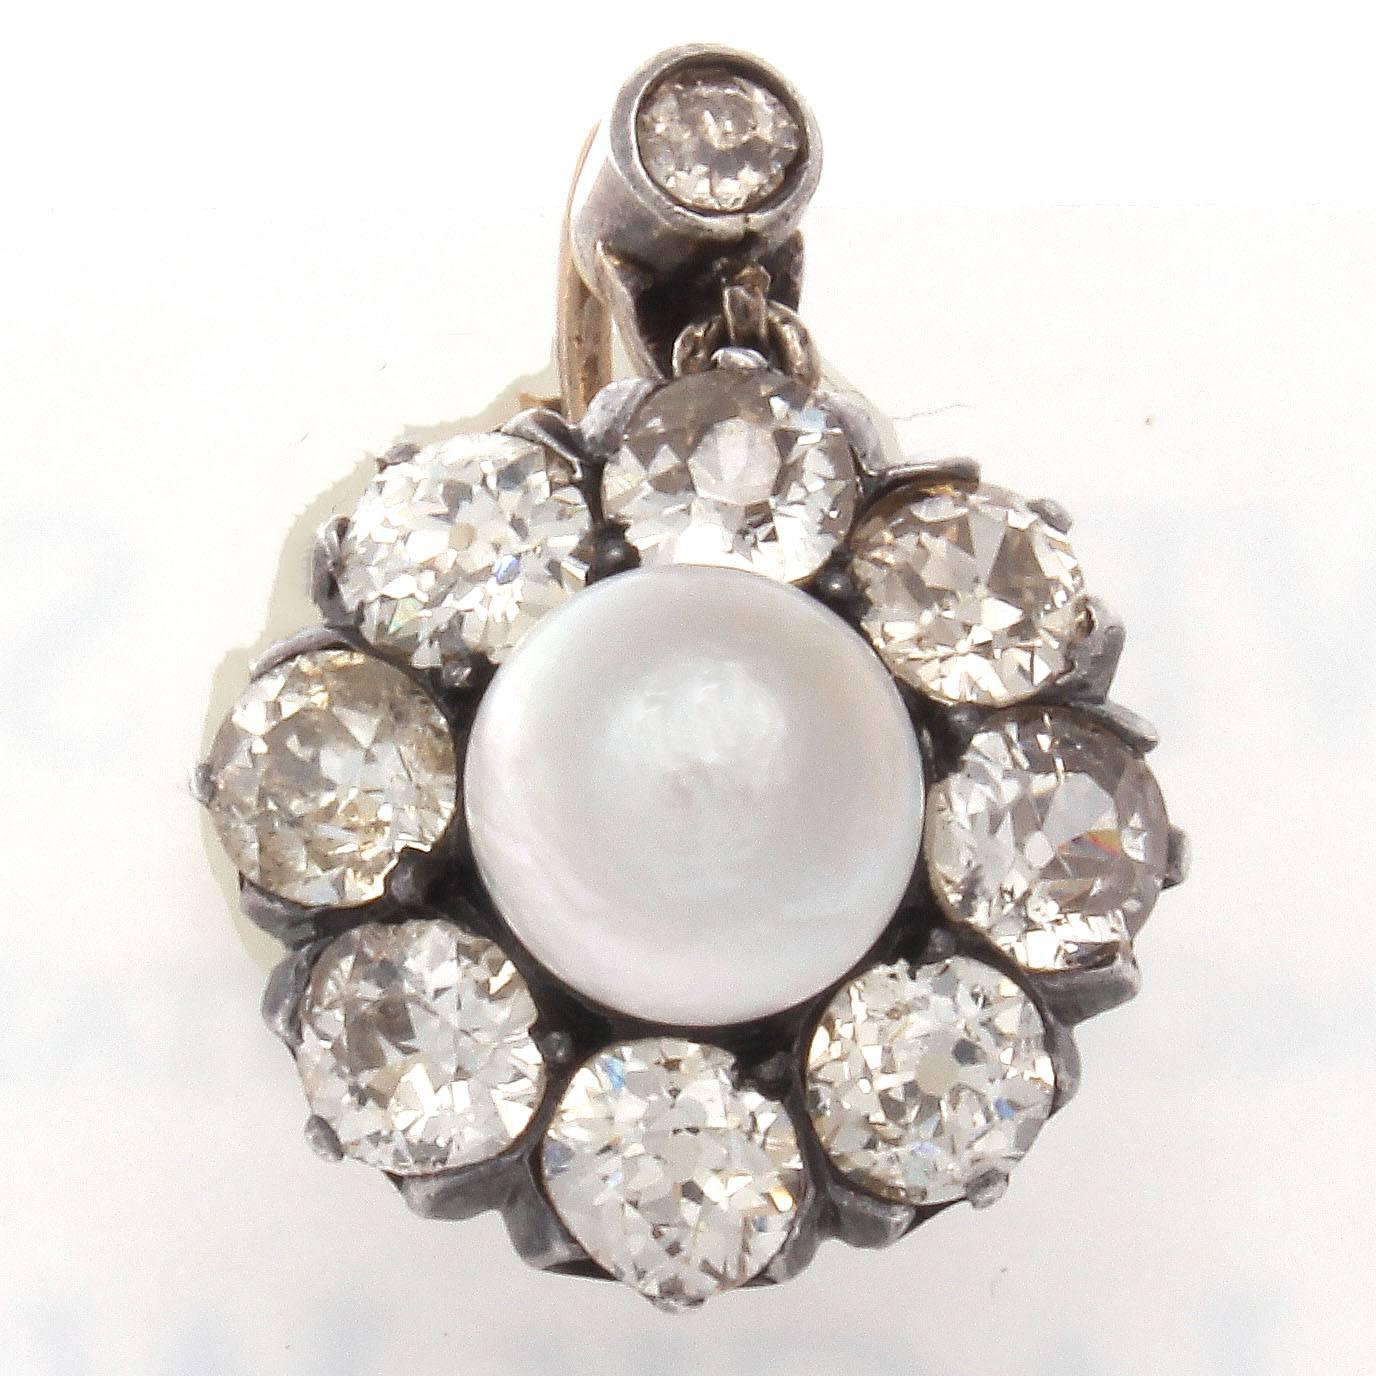 A cluster of tasteful elegance designed with two lovely drops that each feature a beautiful white natural pearl that are surrounded by 8 old European cut diamonds. Hand crafted in silver and gold.